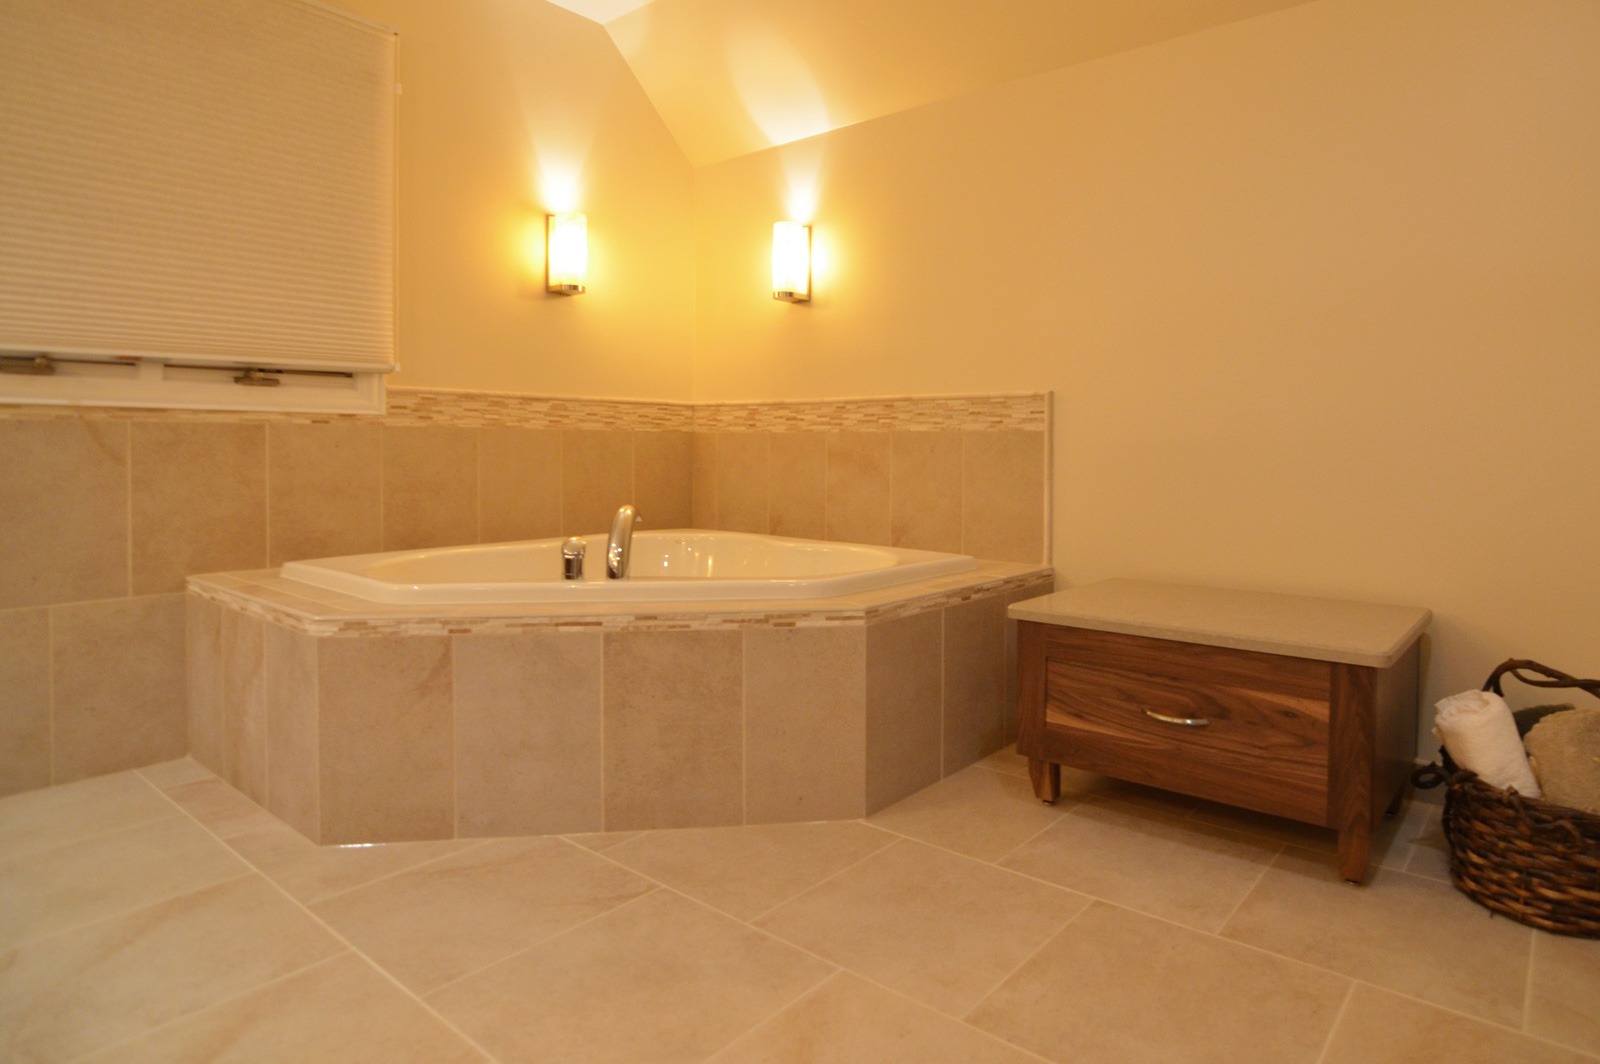 Bathroom remodeling in Naperville, IL. A corner soaking tub replacing the previous oversized tub.